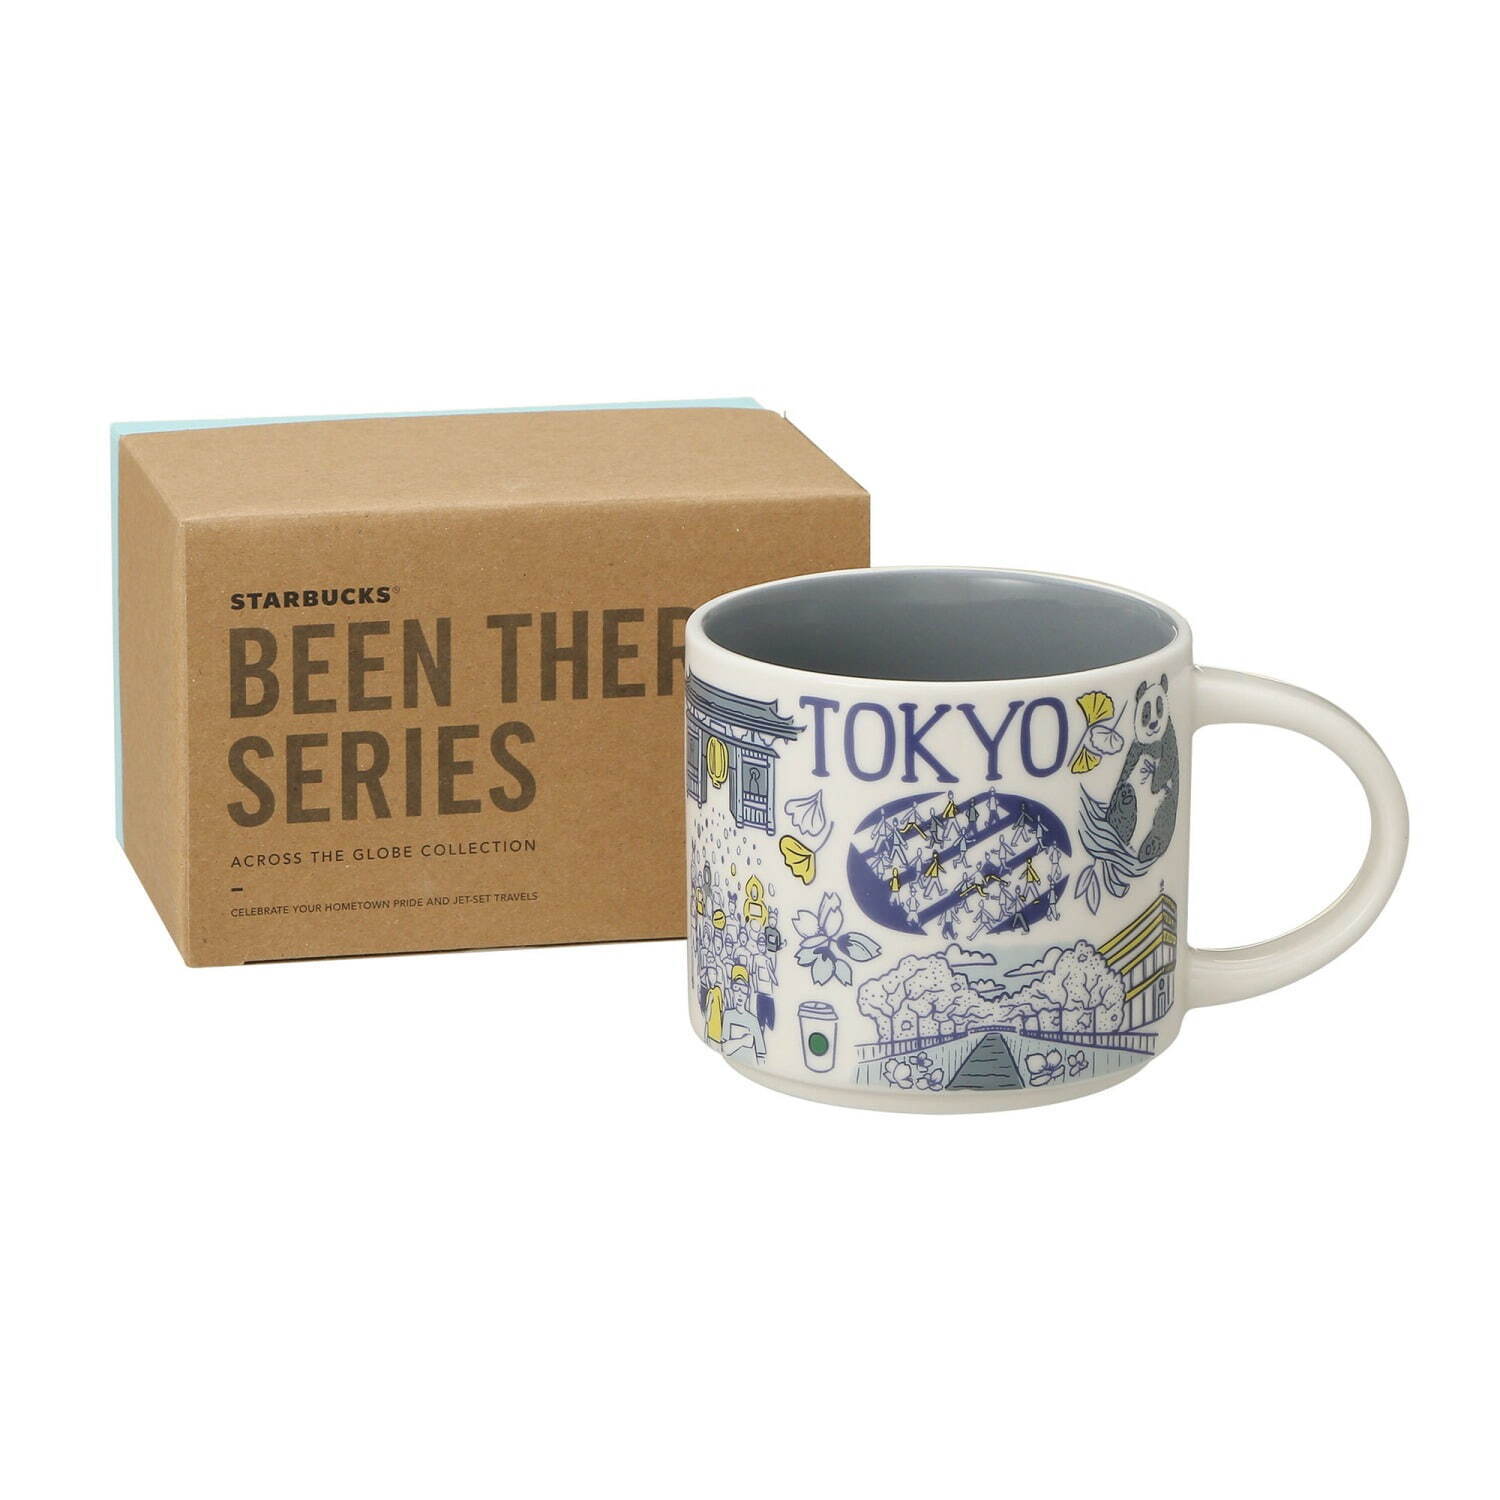 Been There Series マグTOKYO414ml 1,980円